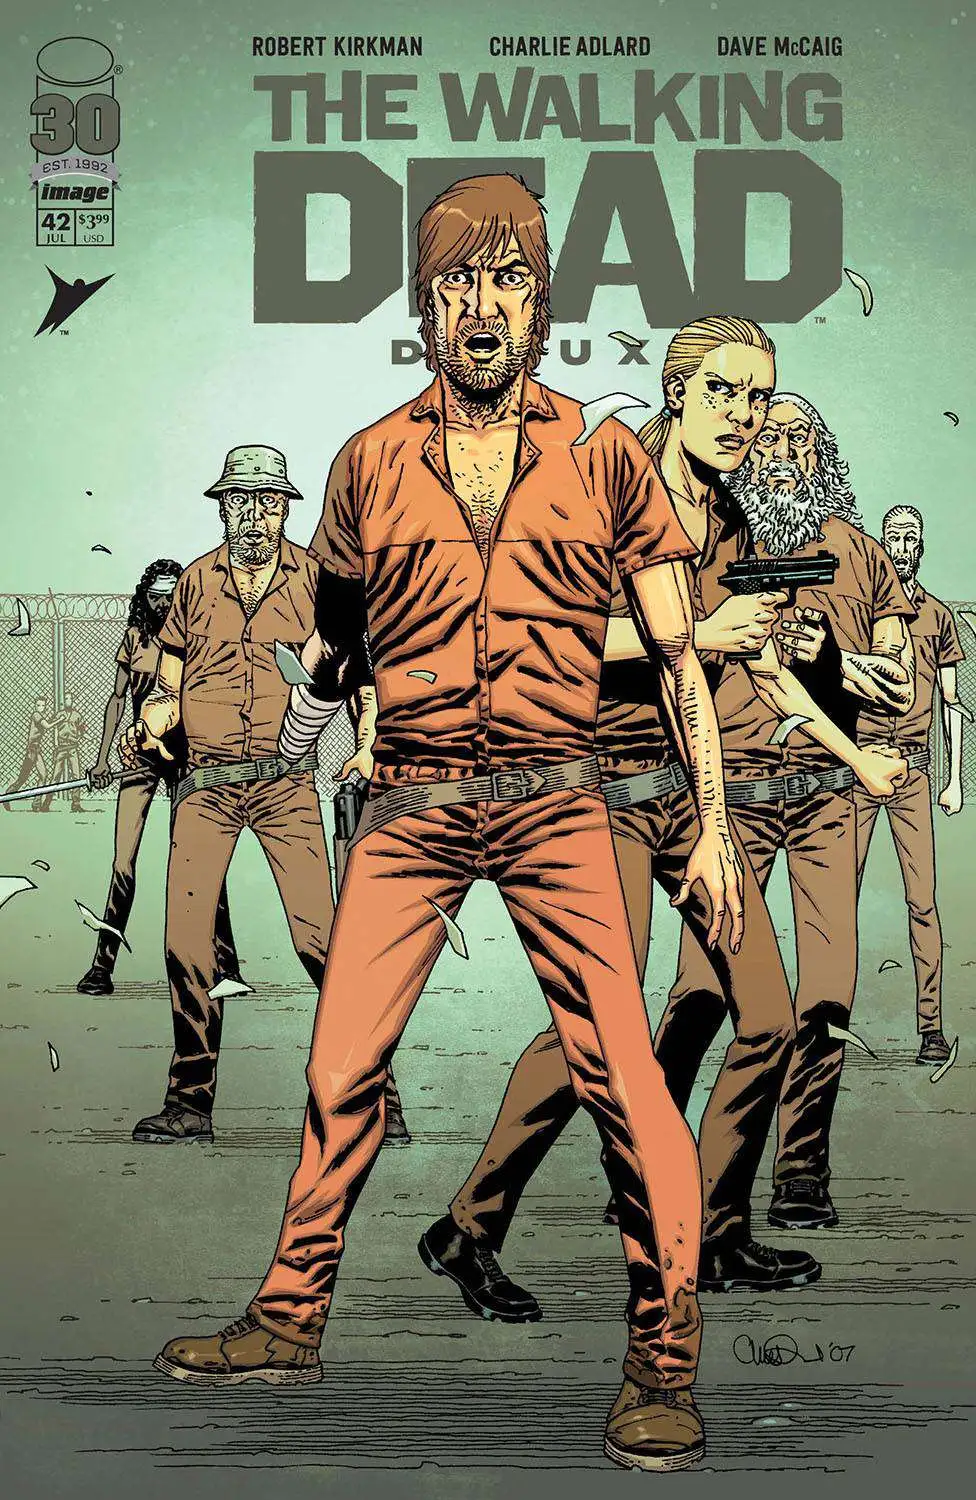 affald Arkitektur glide Image Comics The Walking Dead Deluxe Comic Book 42 Cover B - ToyWiz